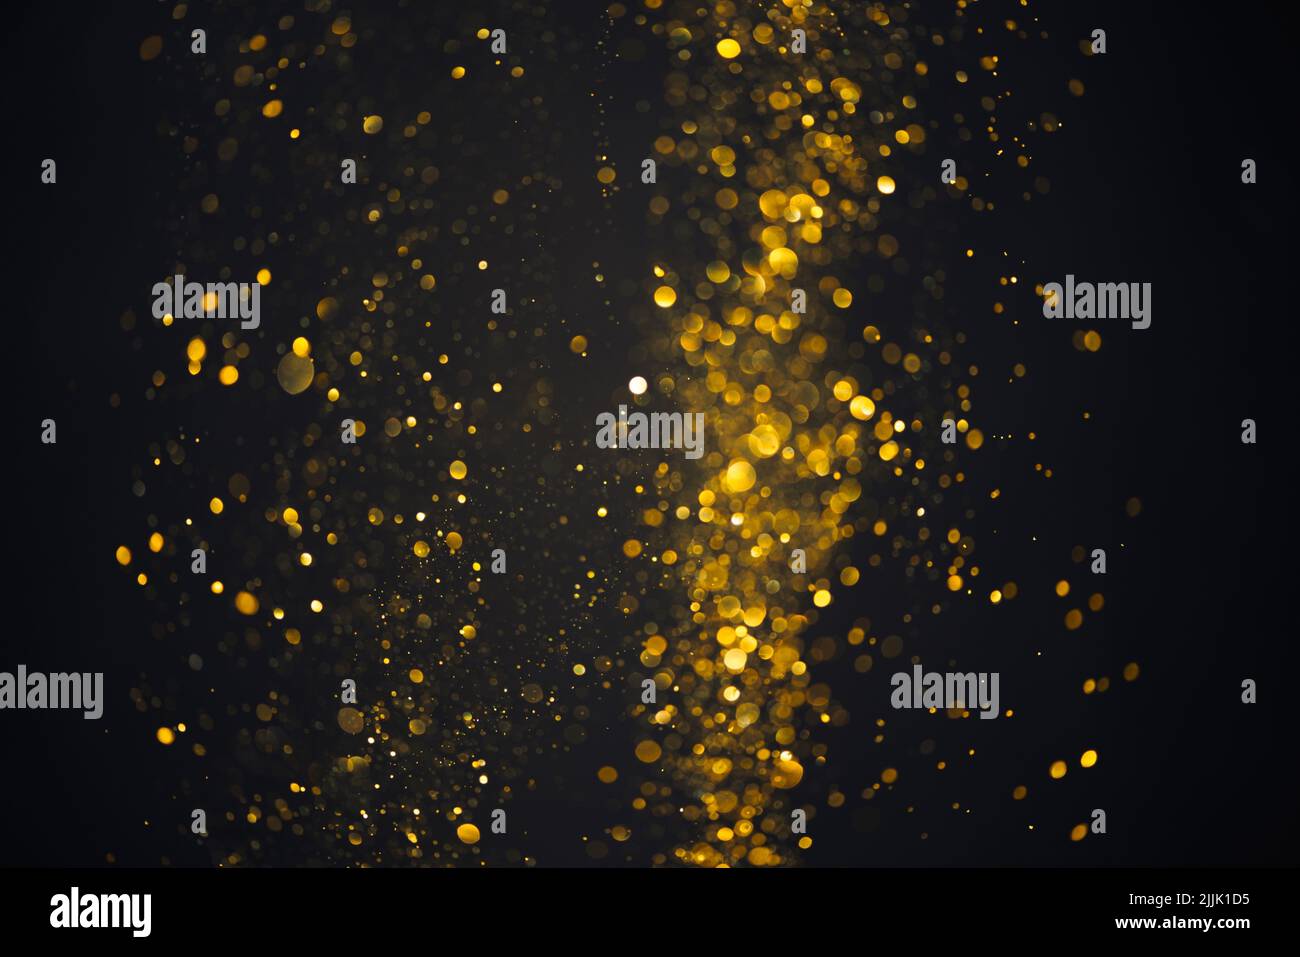 Glowing golden glitter shiny particles lights abstract bokeh dark background Stock Photo